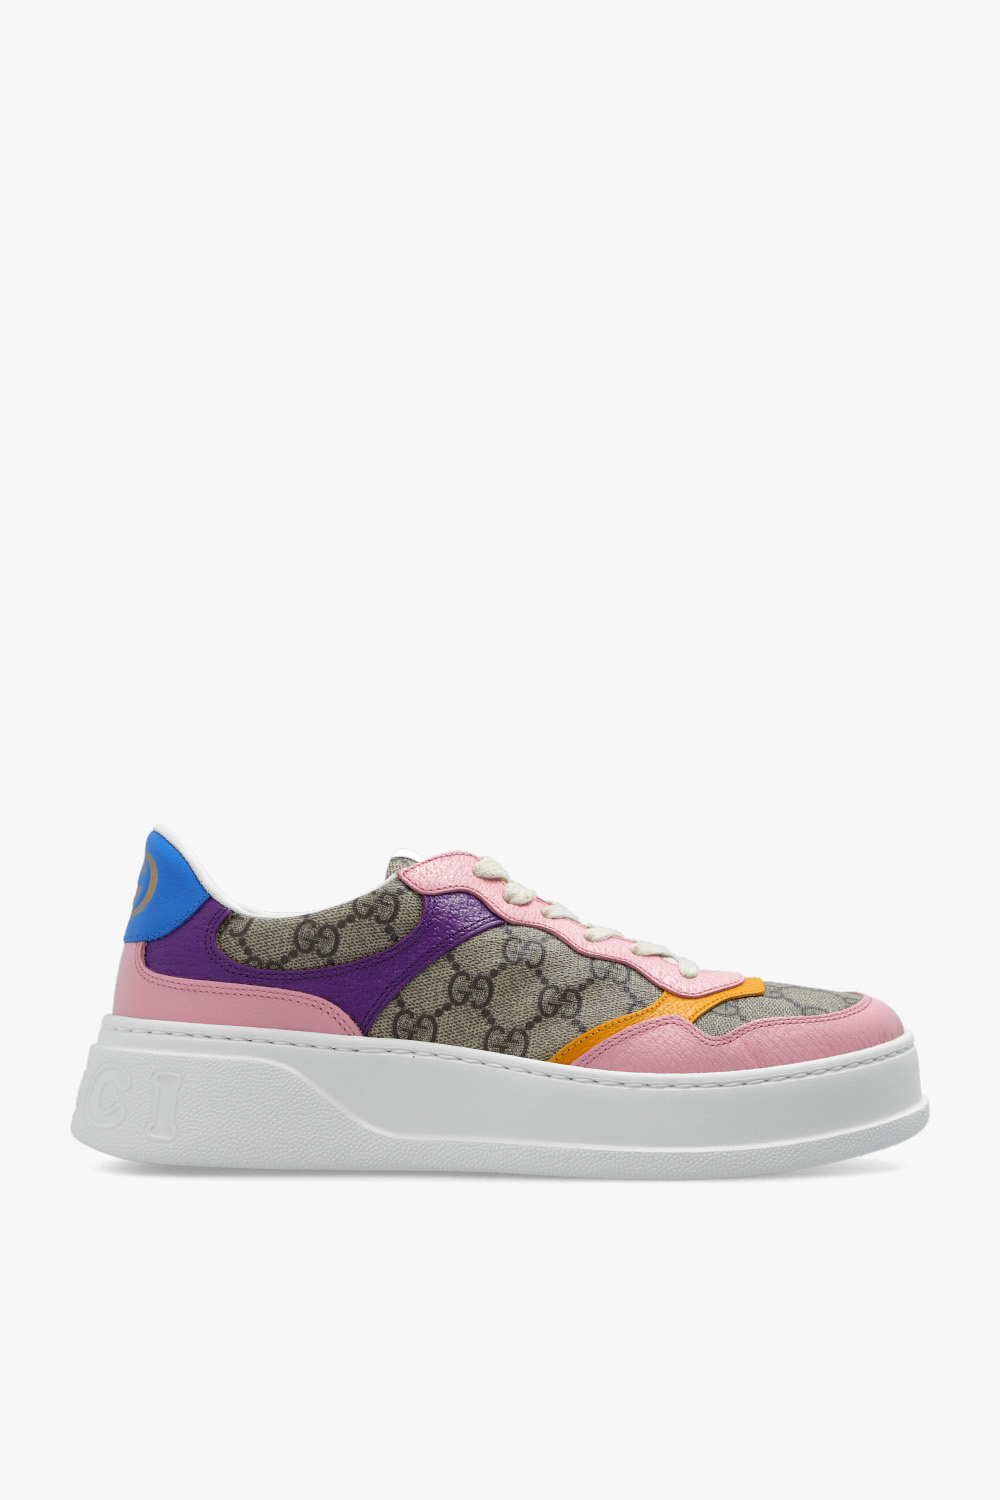 Gucci Gucci Kids Children's leather sneaker with Web